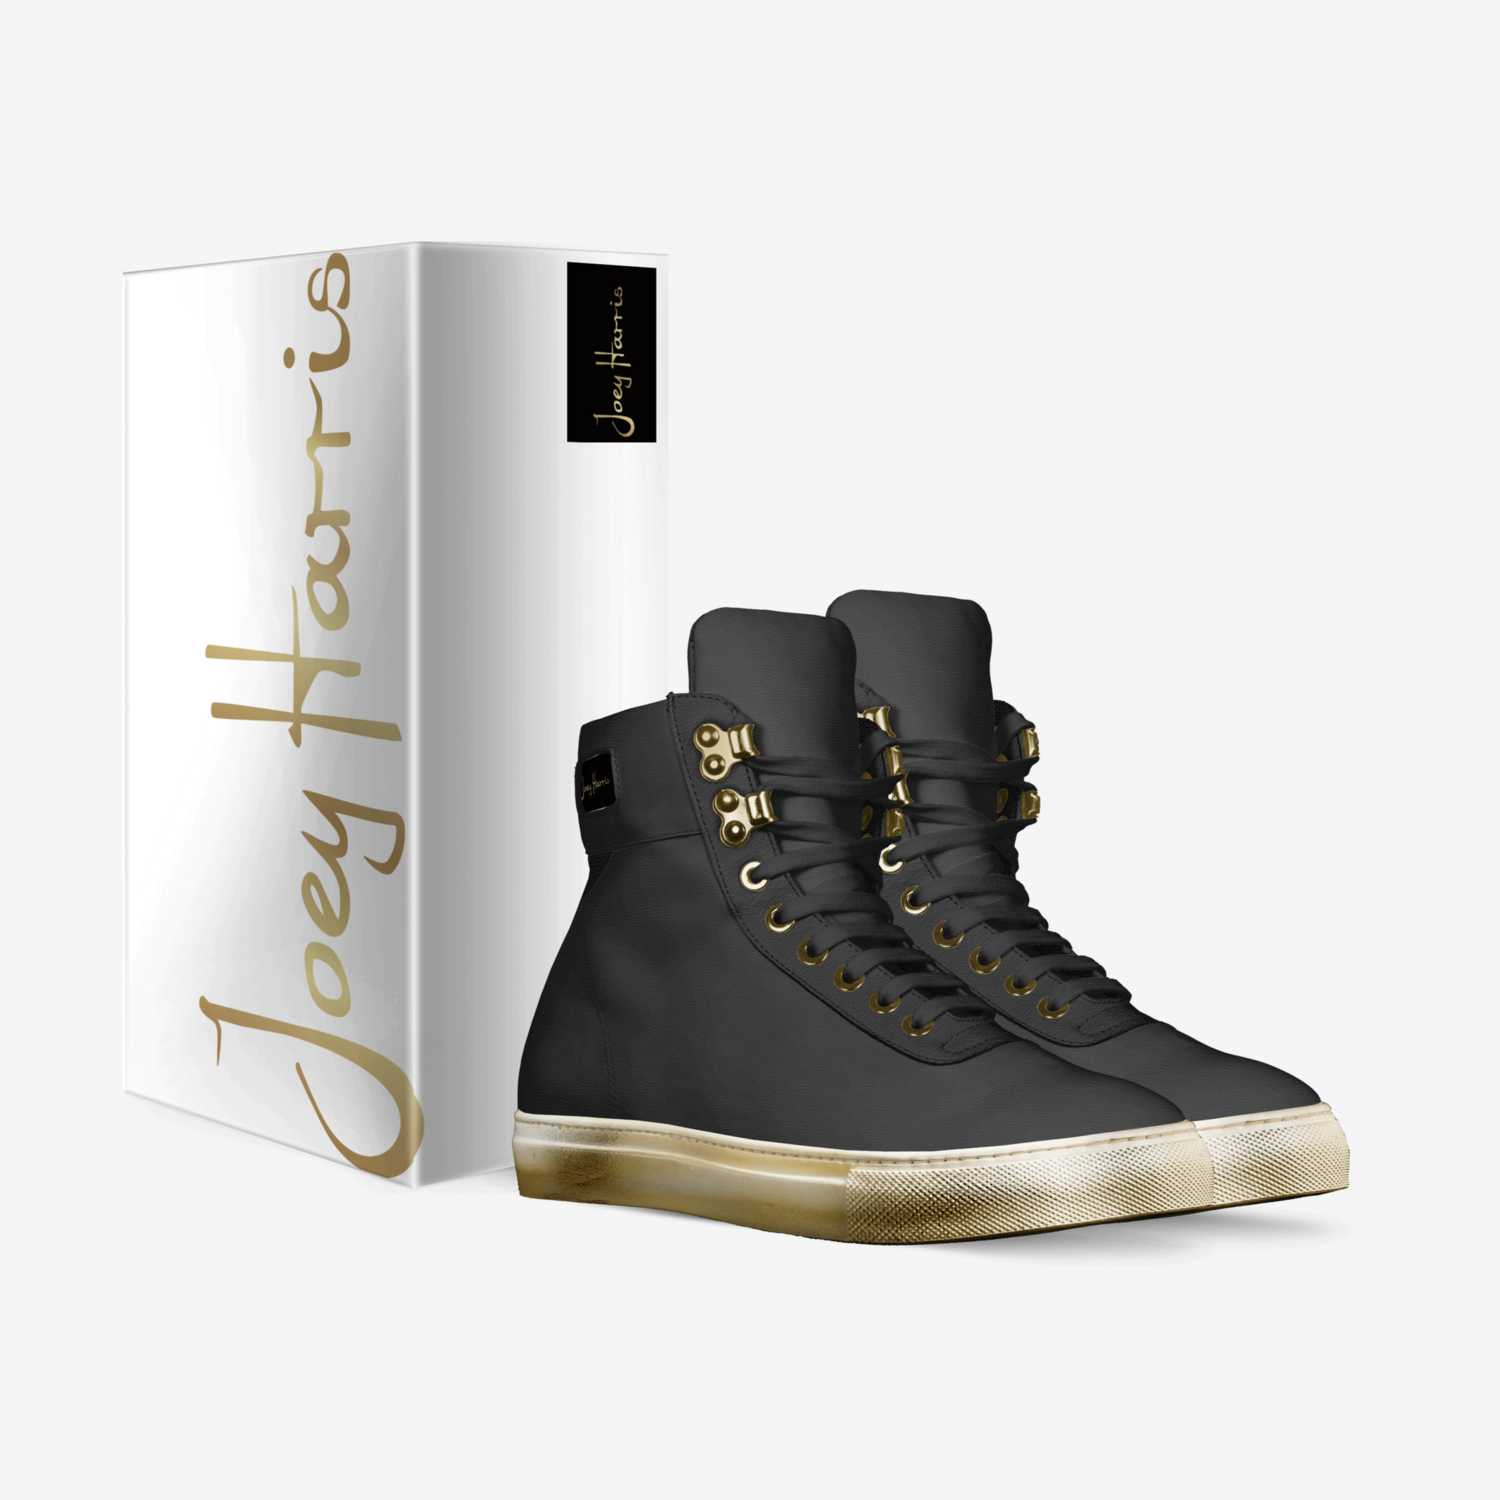 JHarris Designs  custom made in Italy shoes by Haze Claremont | Box view